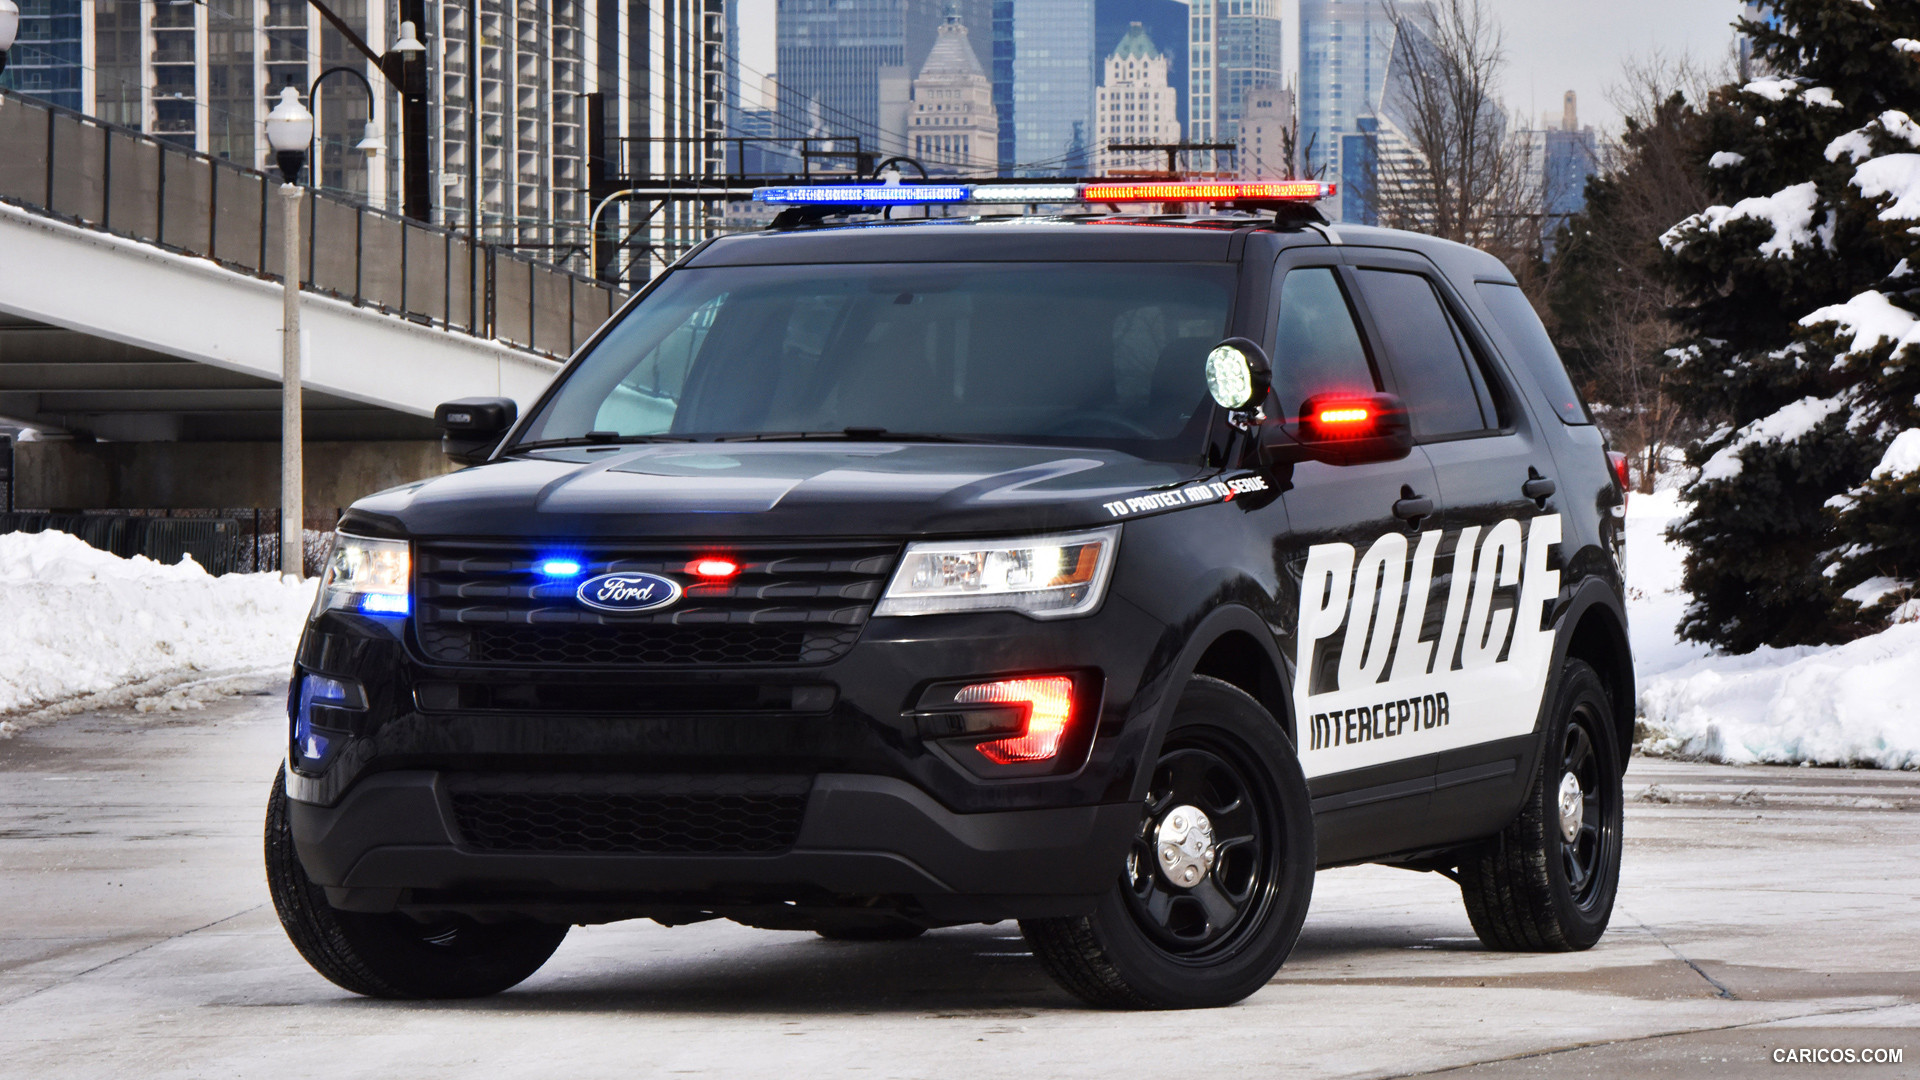 2016 Ford Police Interceptor Utility   Front Caricos